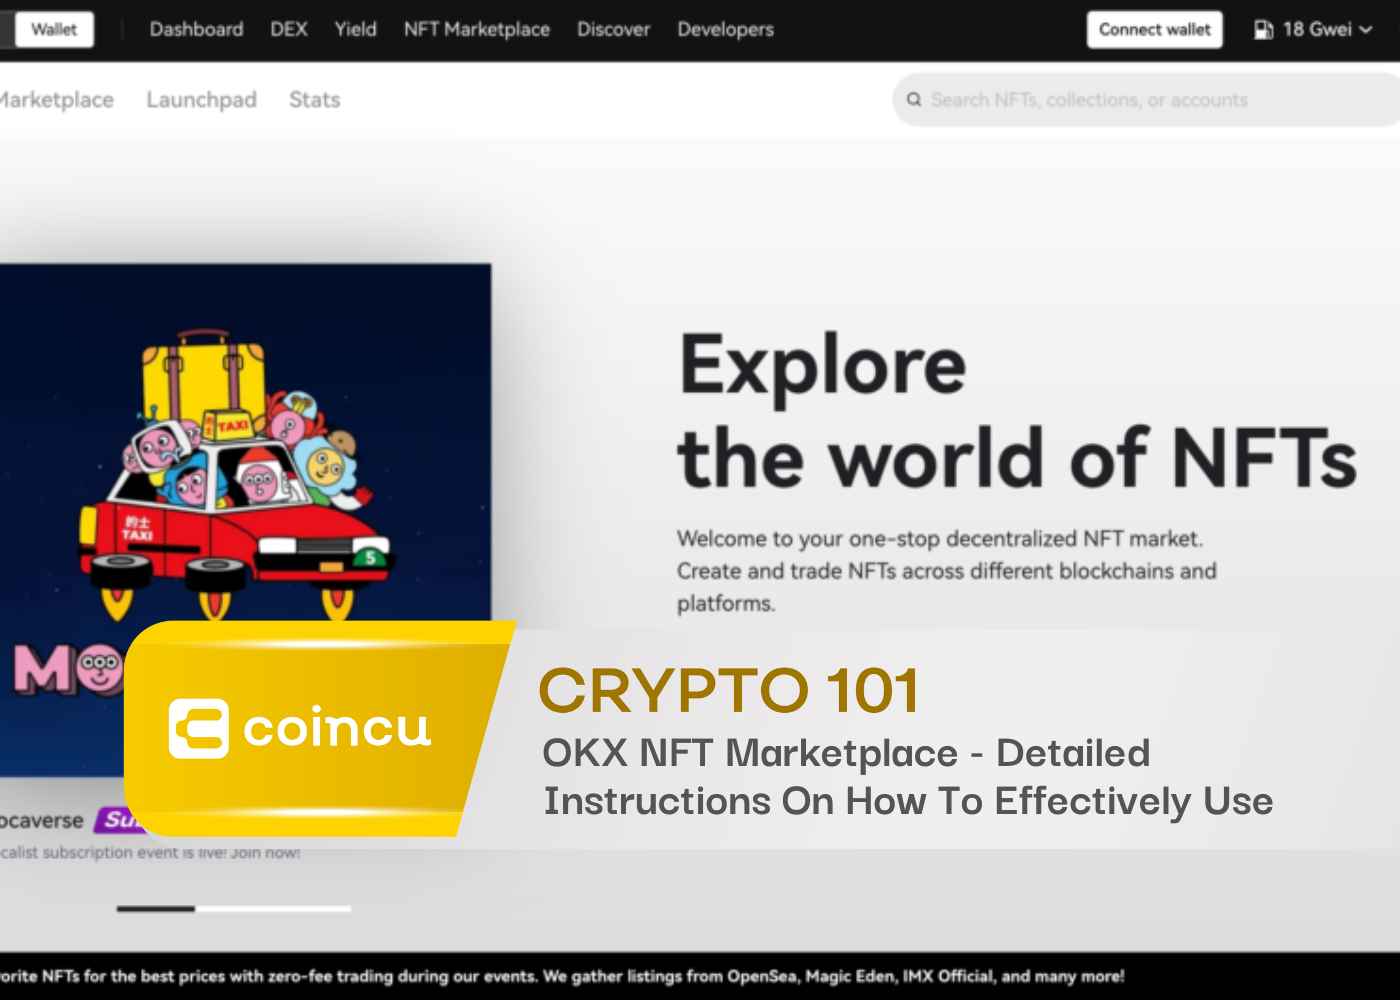 OKX NFT Marketplace - Detailed Instructions On How To Effectively Use